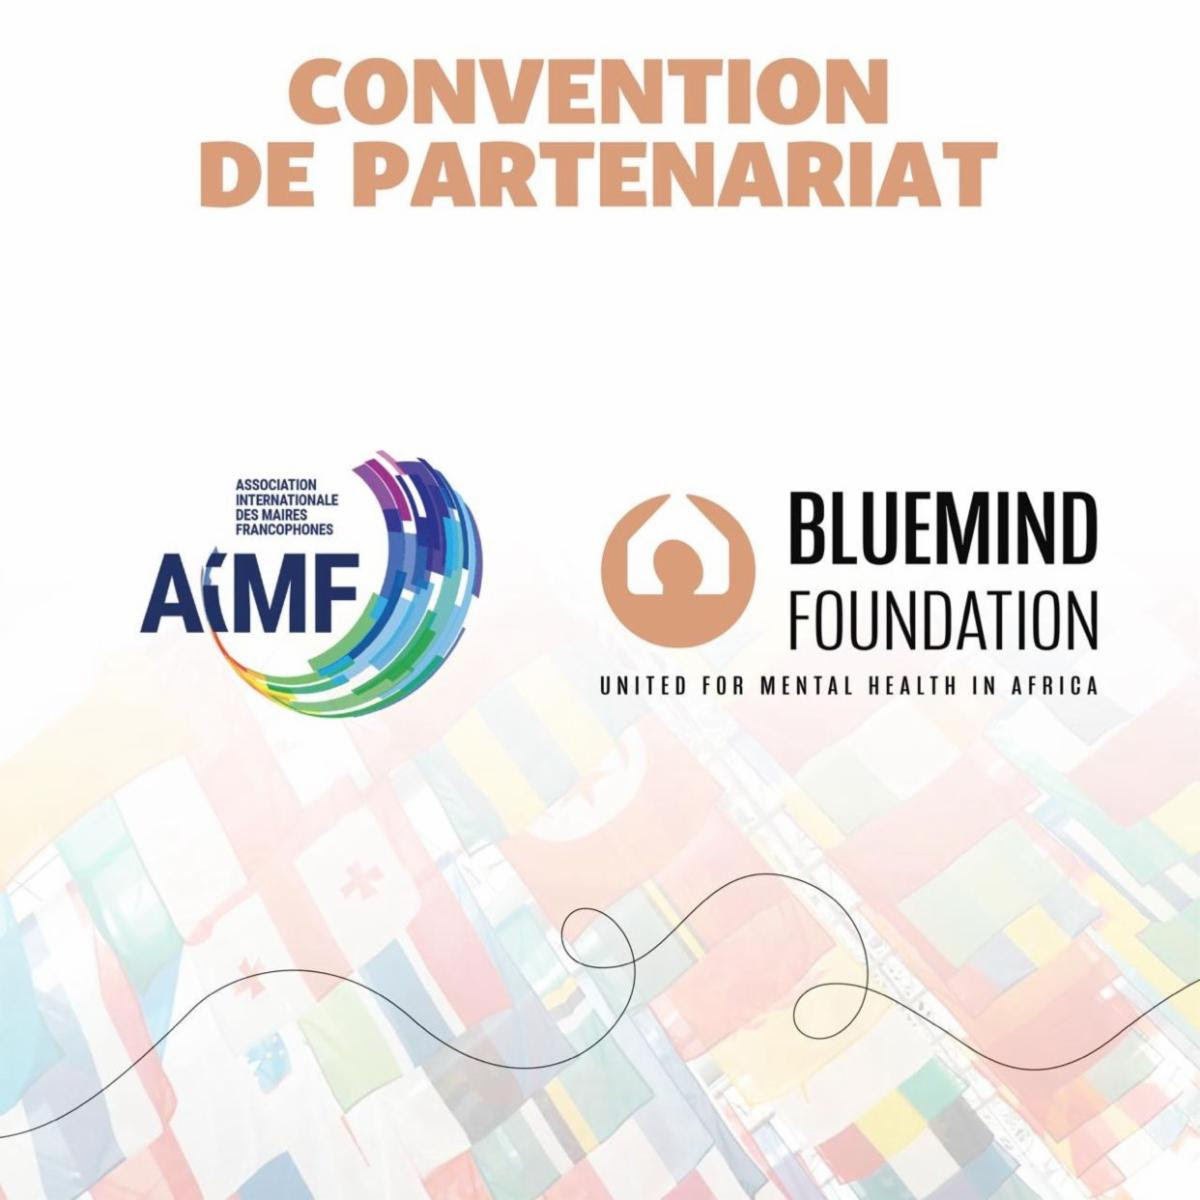 Bluemind Foundation and AIMF Launch “Villes Bleues” Initiative to Foster Mental Well-being in French-speaking Cities